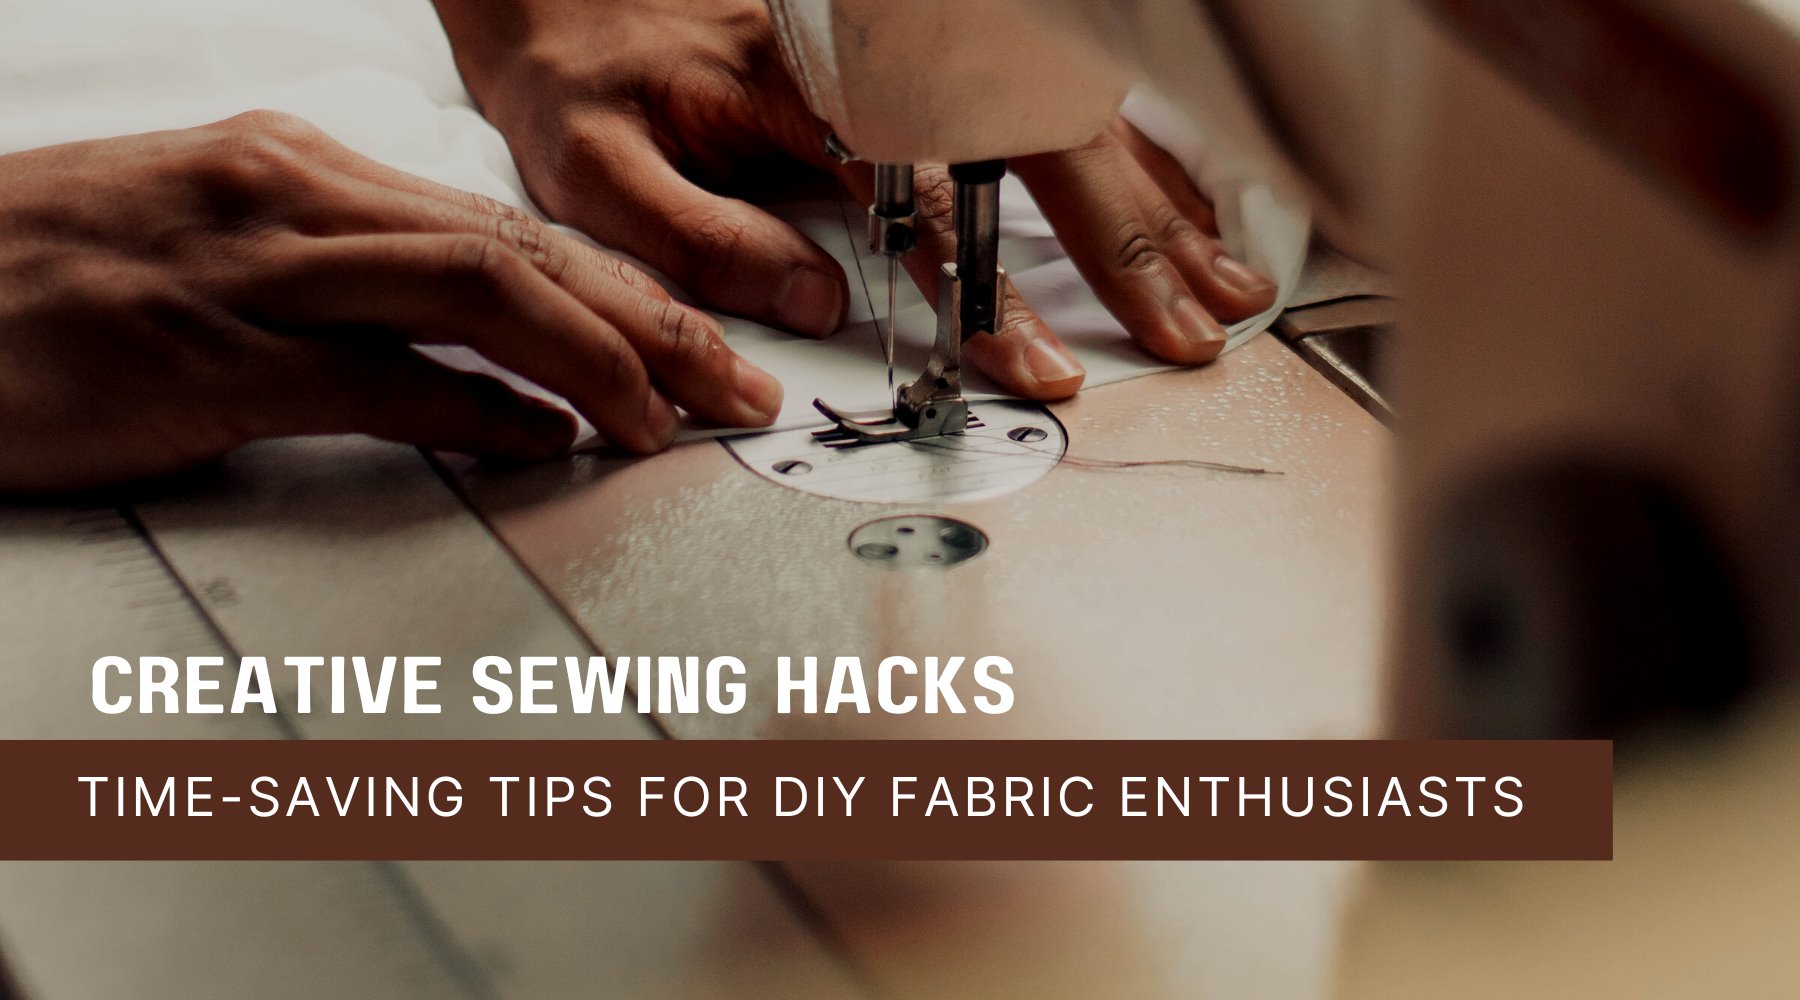 Creative Sewing Hacks: Time-Saving Tips for DIY Fabric Enthusiasts